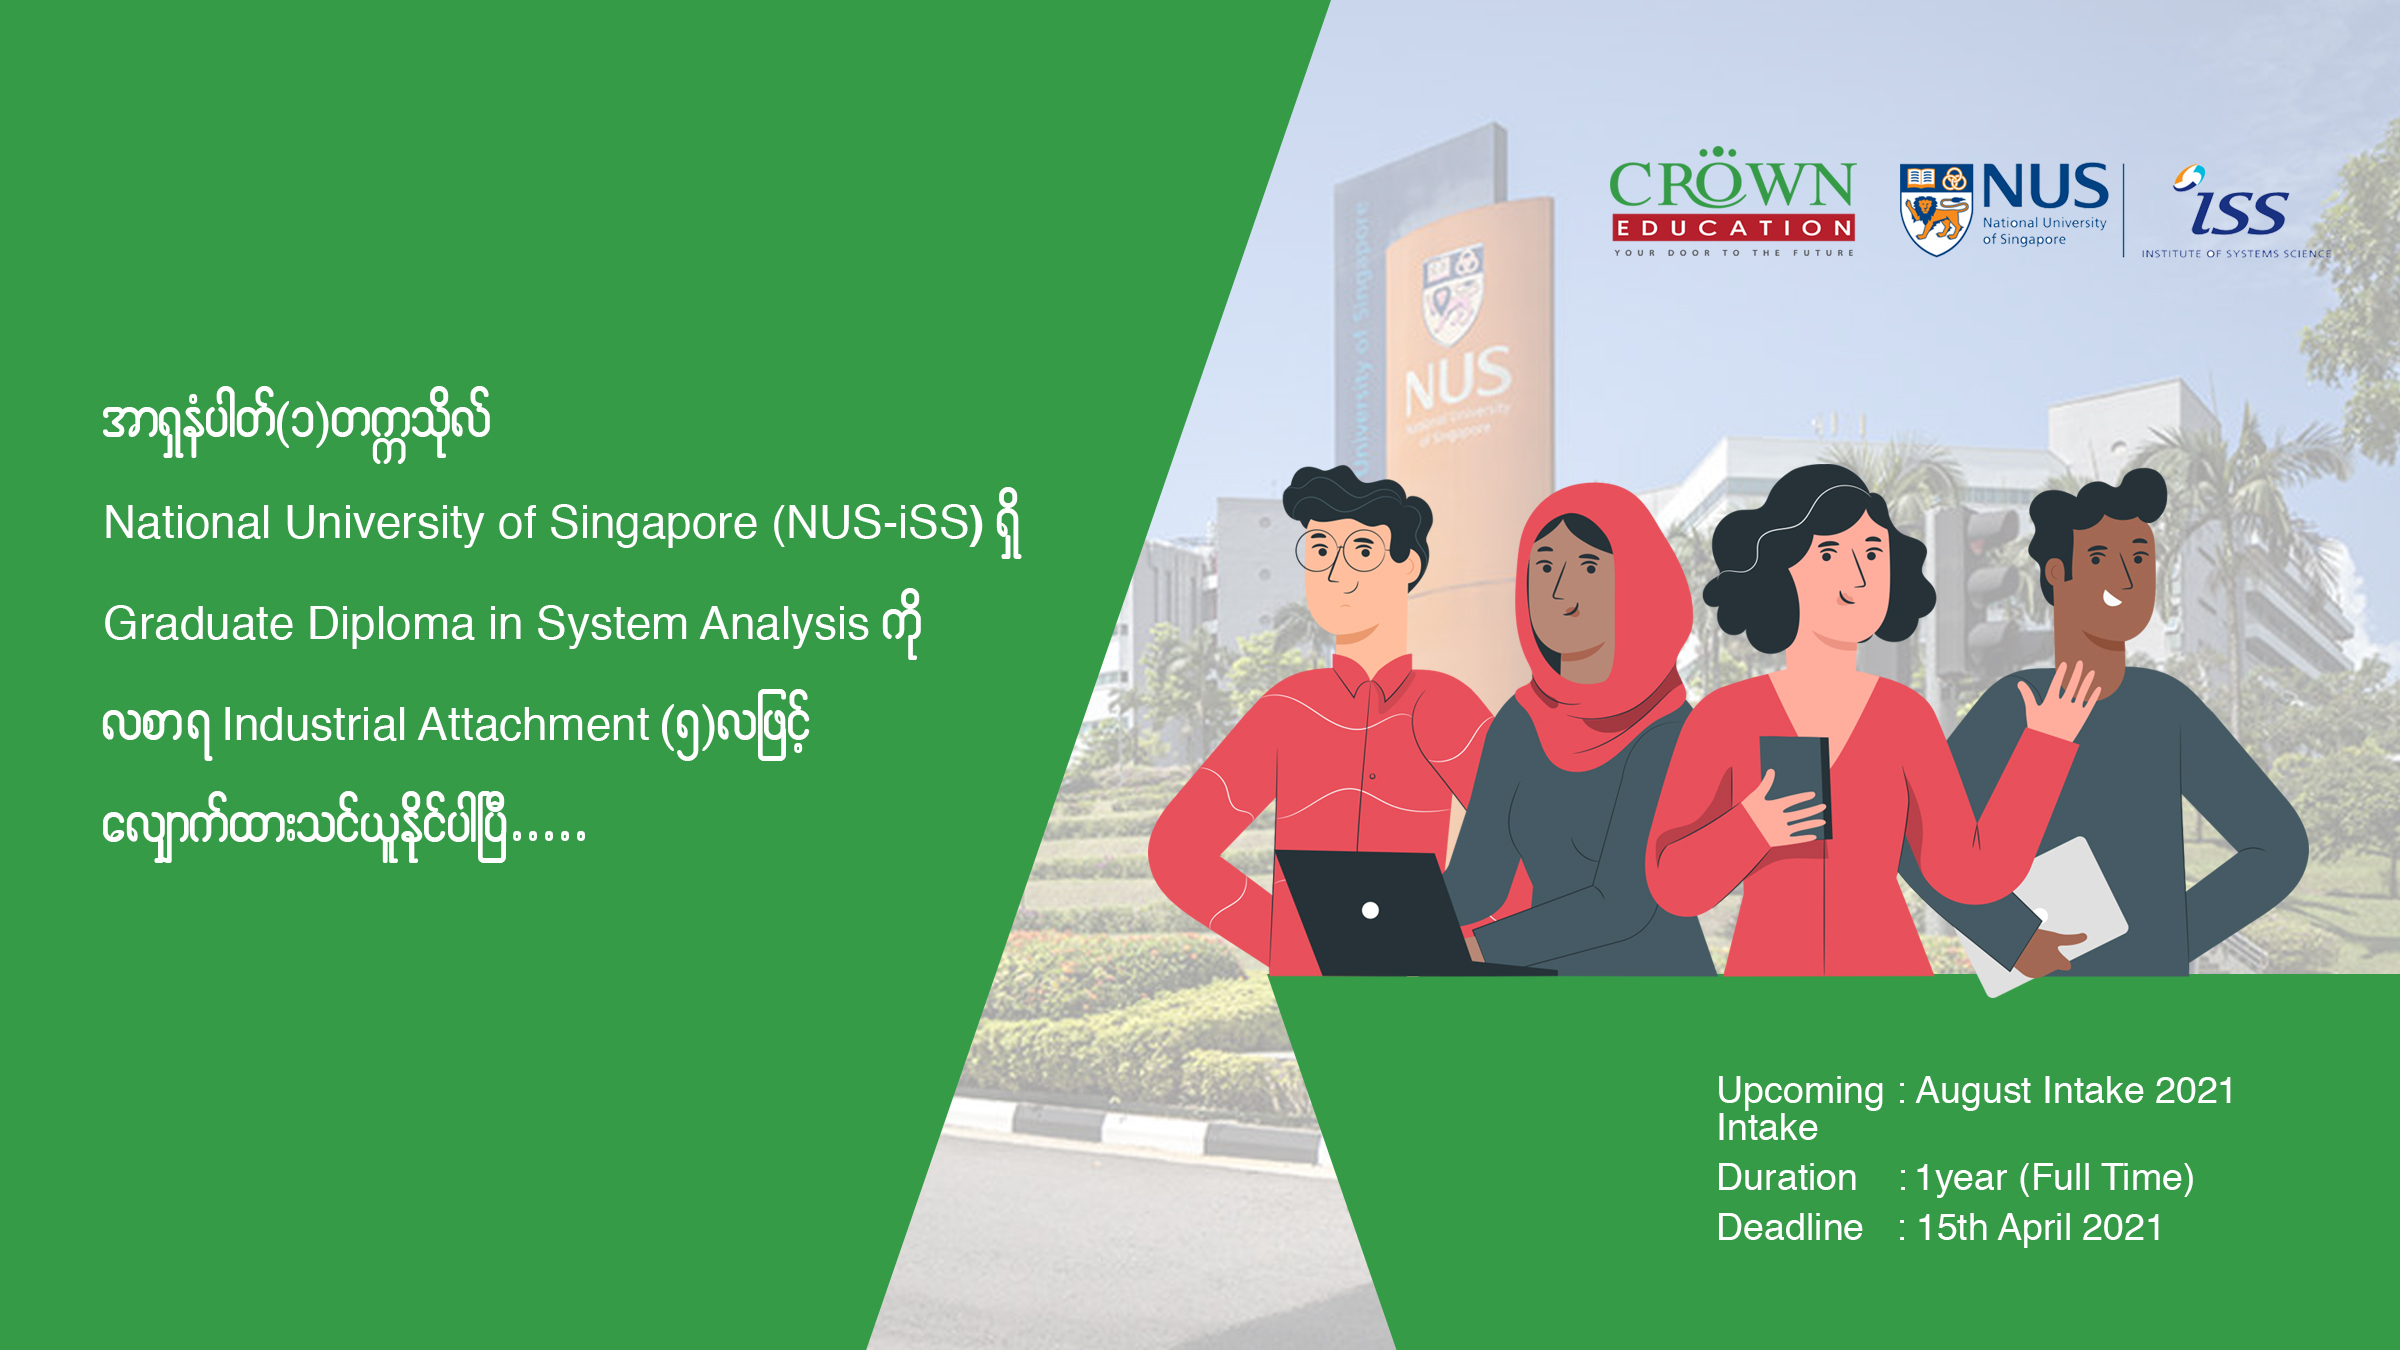  NATIONAL UNIVERSITY OF SINGAPORE NUS ISS GRADUATE DIPLOMA IN SYSTEM